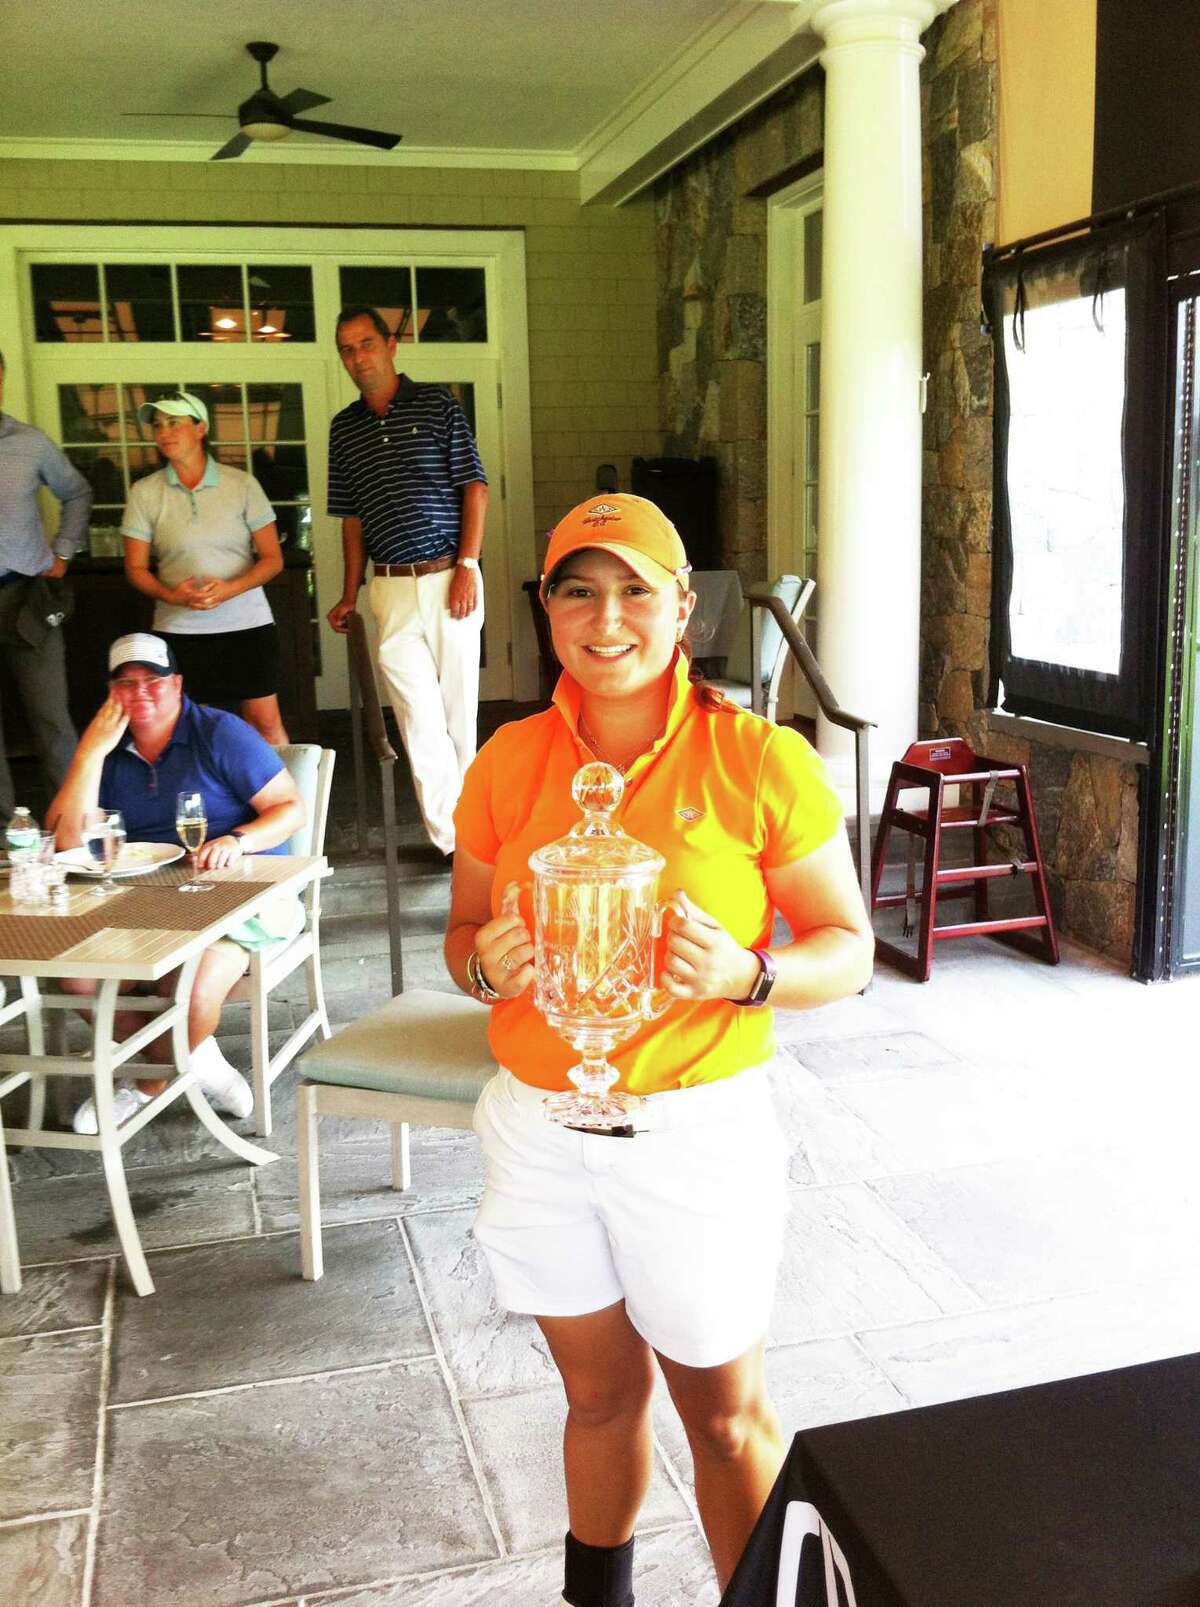 McDaid wins Womens Met Open Championship for second straight year